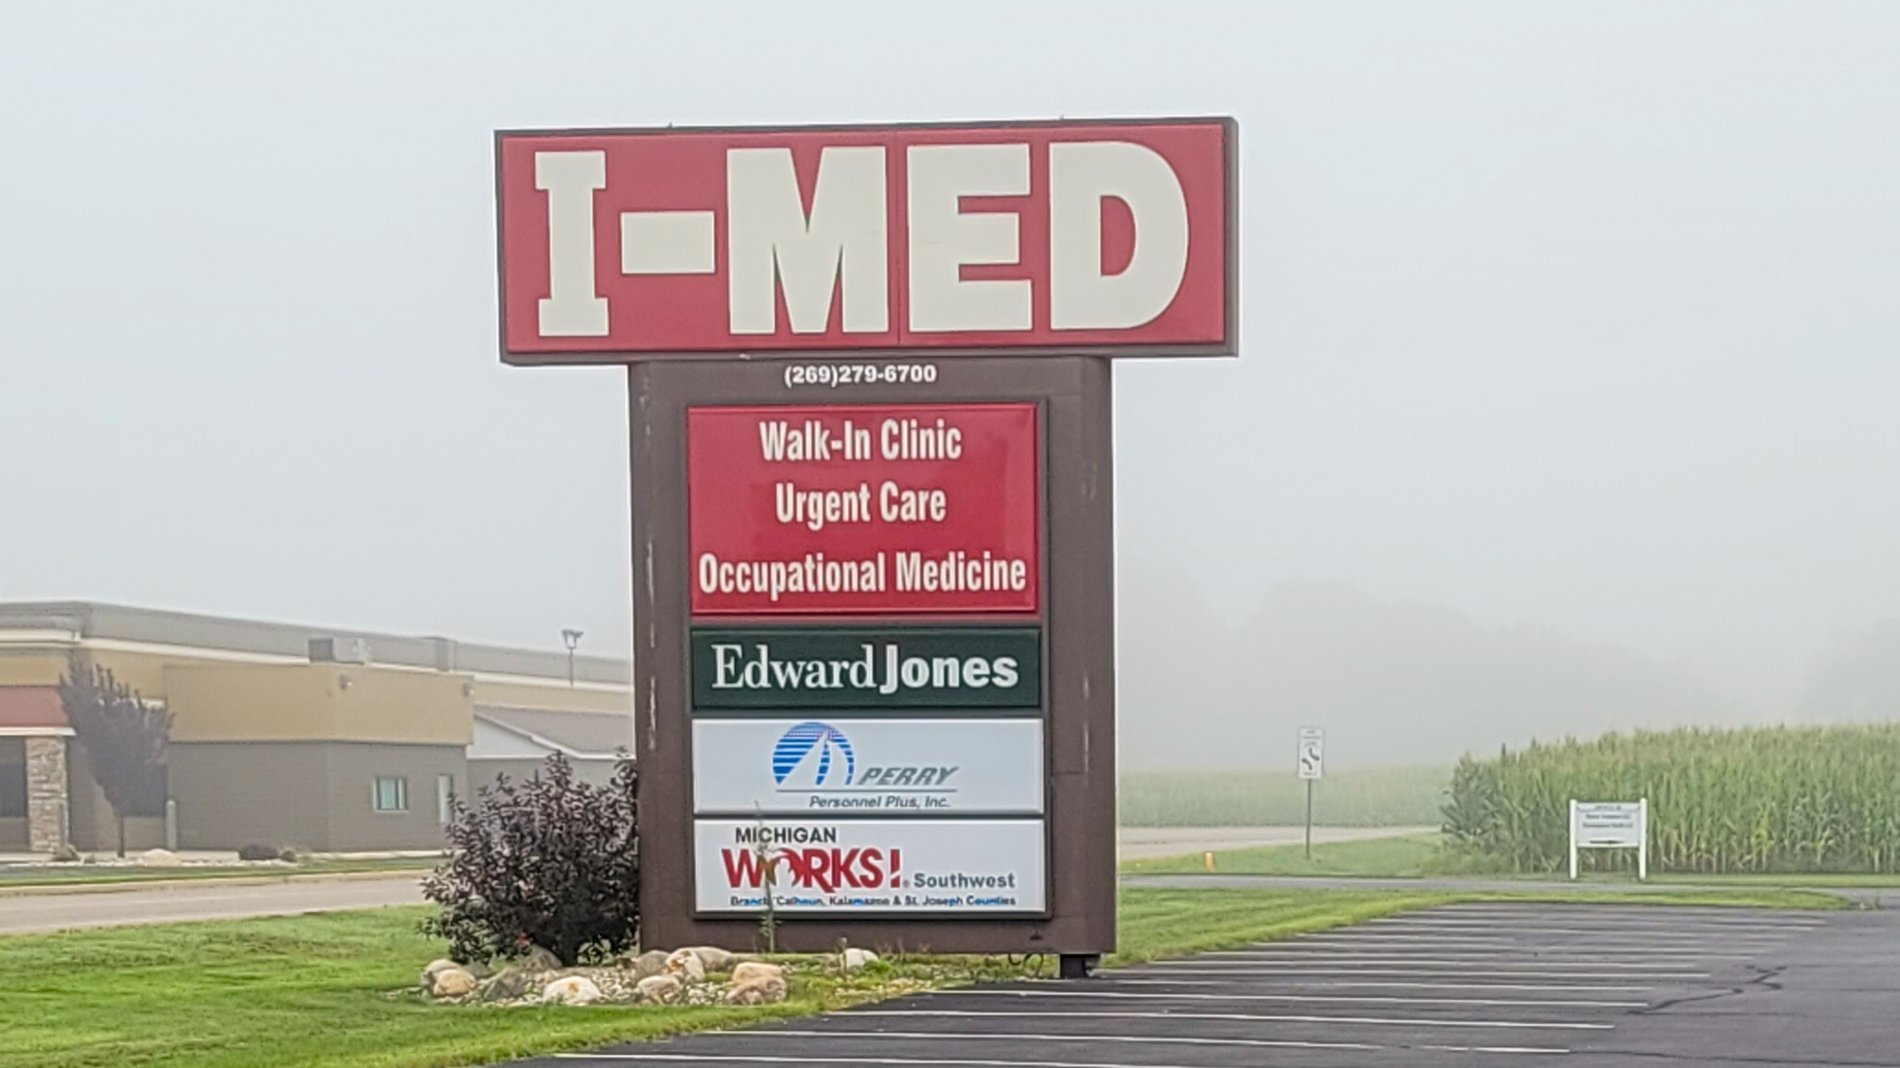 A large red sign says "I-MED: walk-in clinic, urgent care, and occupational medicine"